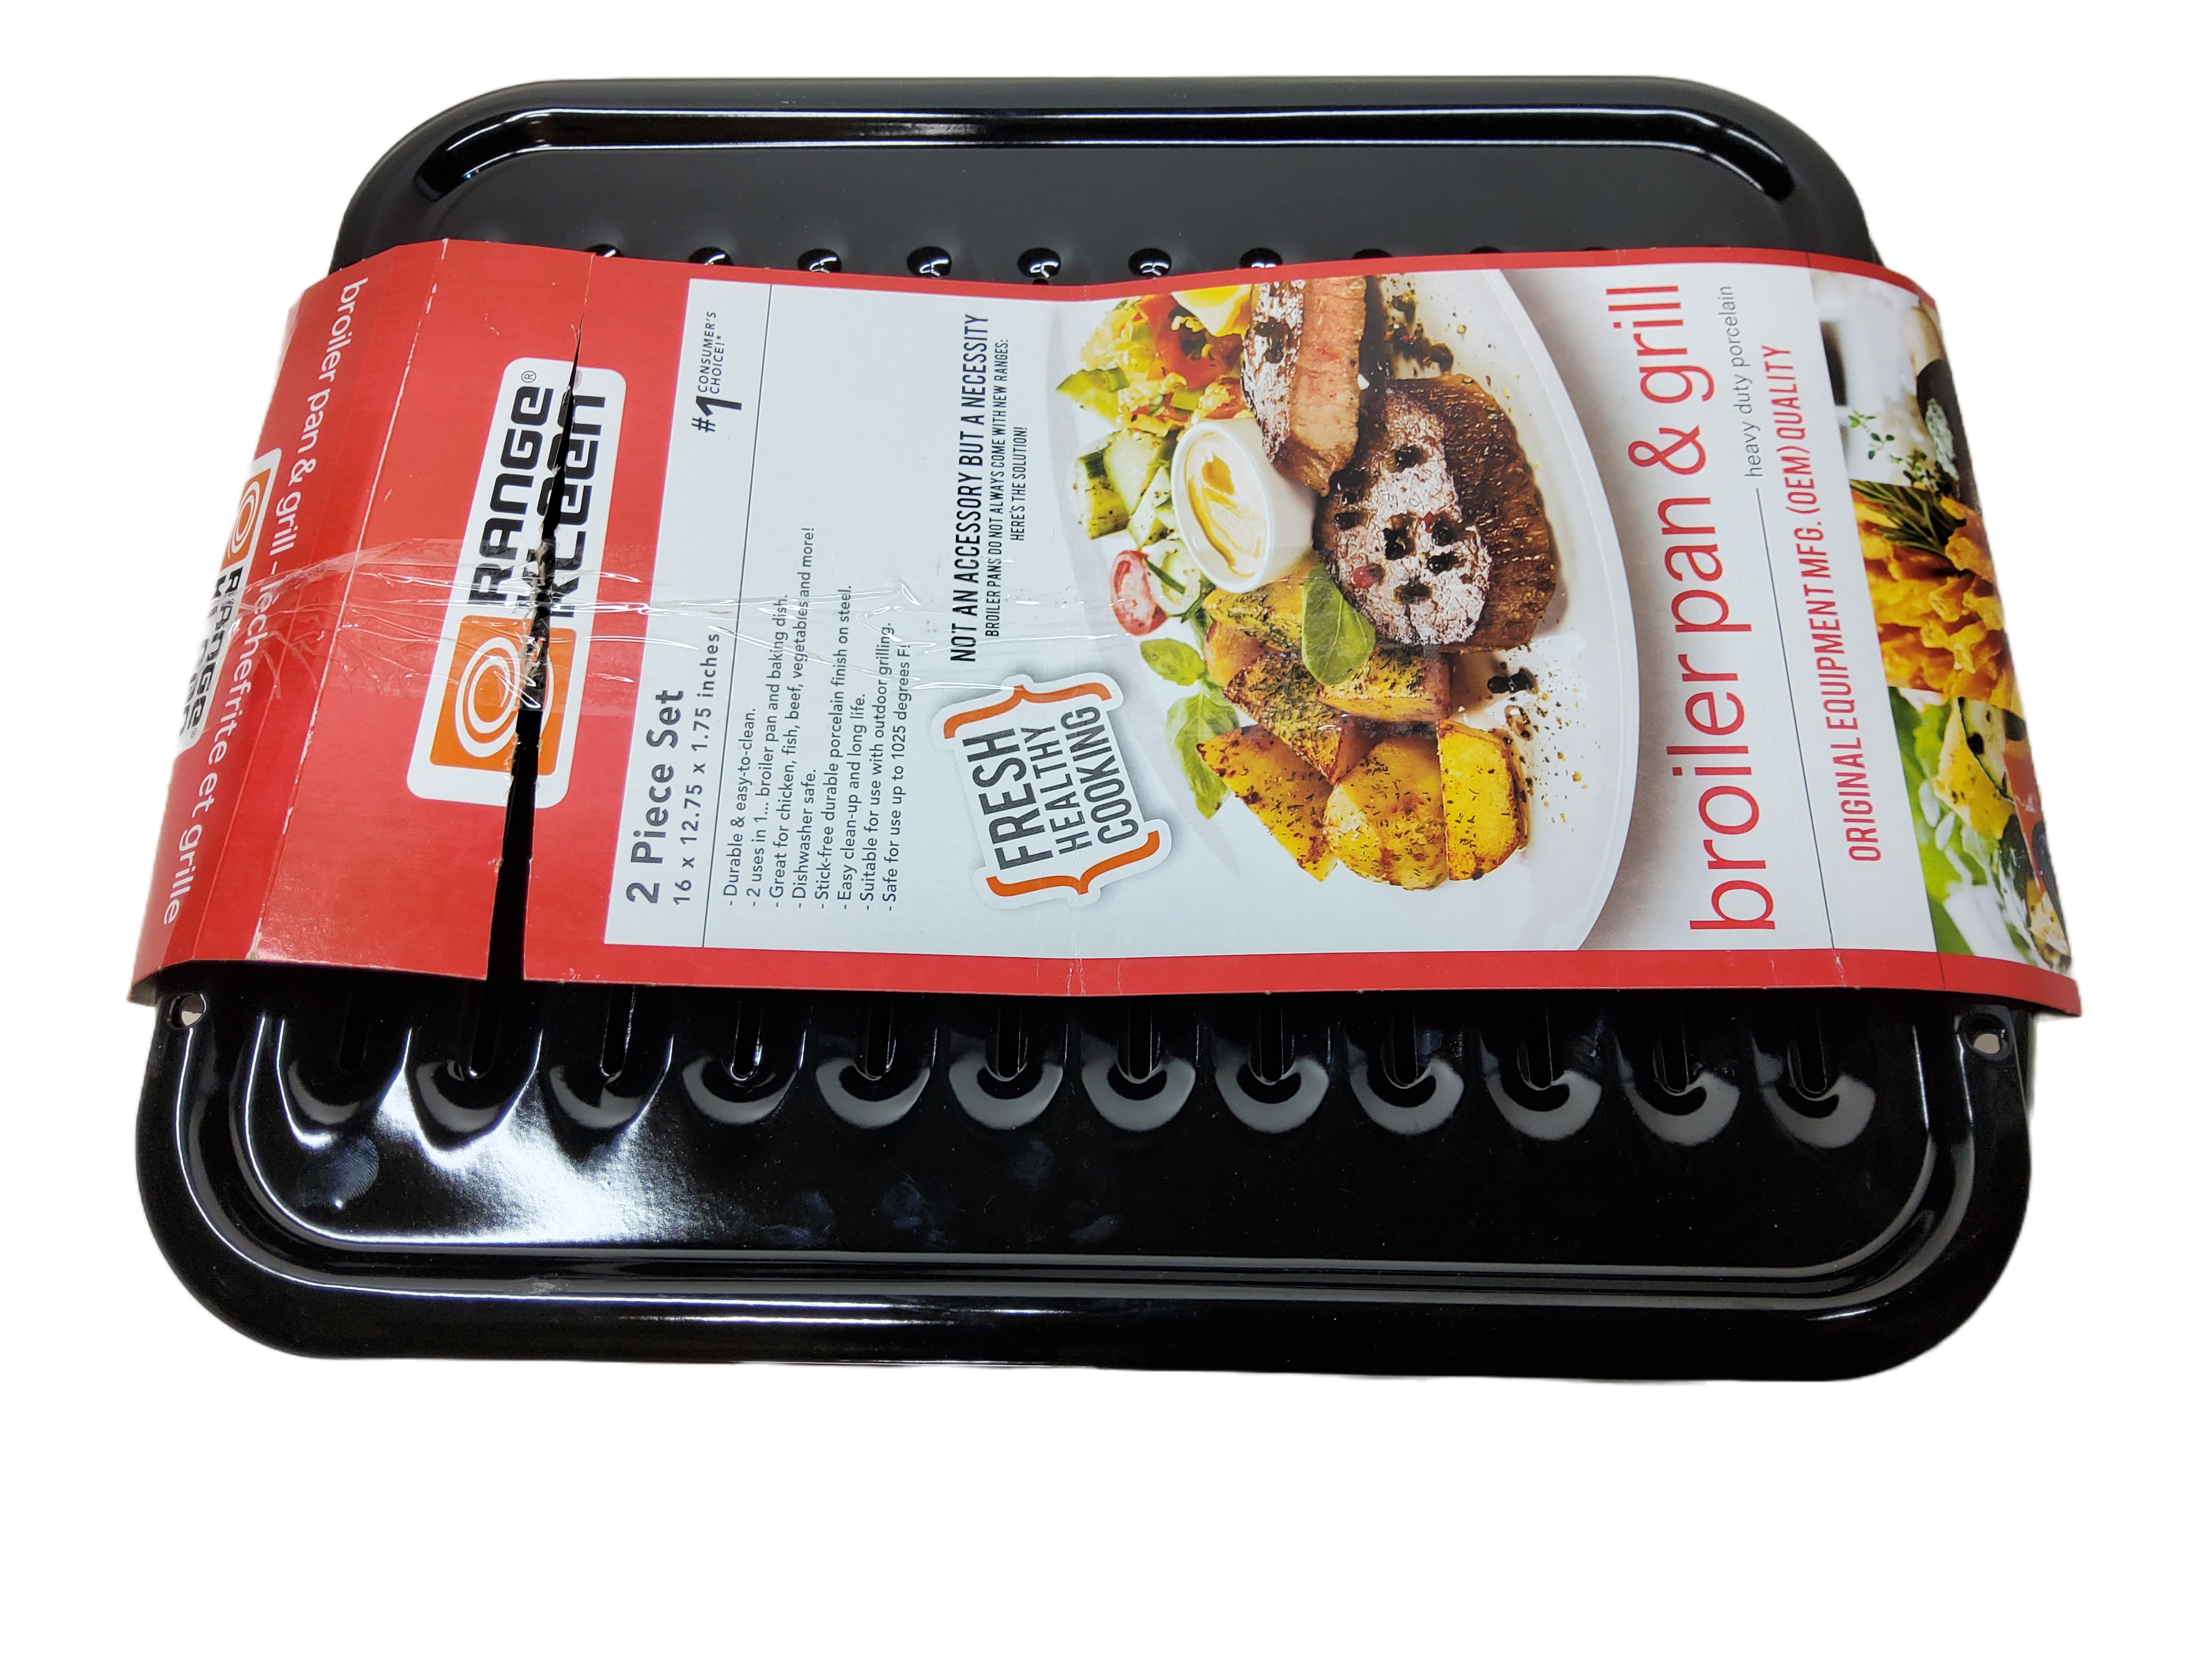 Range Kleen Porcelain Broiler Pan with Chrome Grill at Tractor Supply Co.